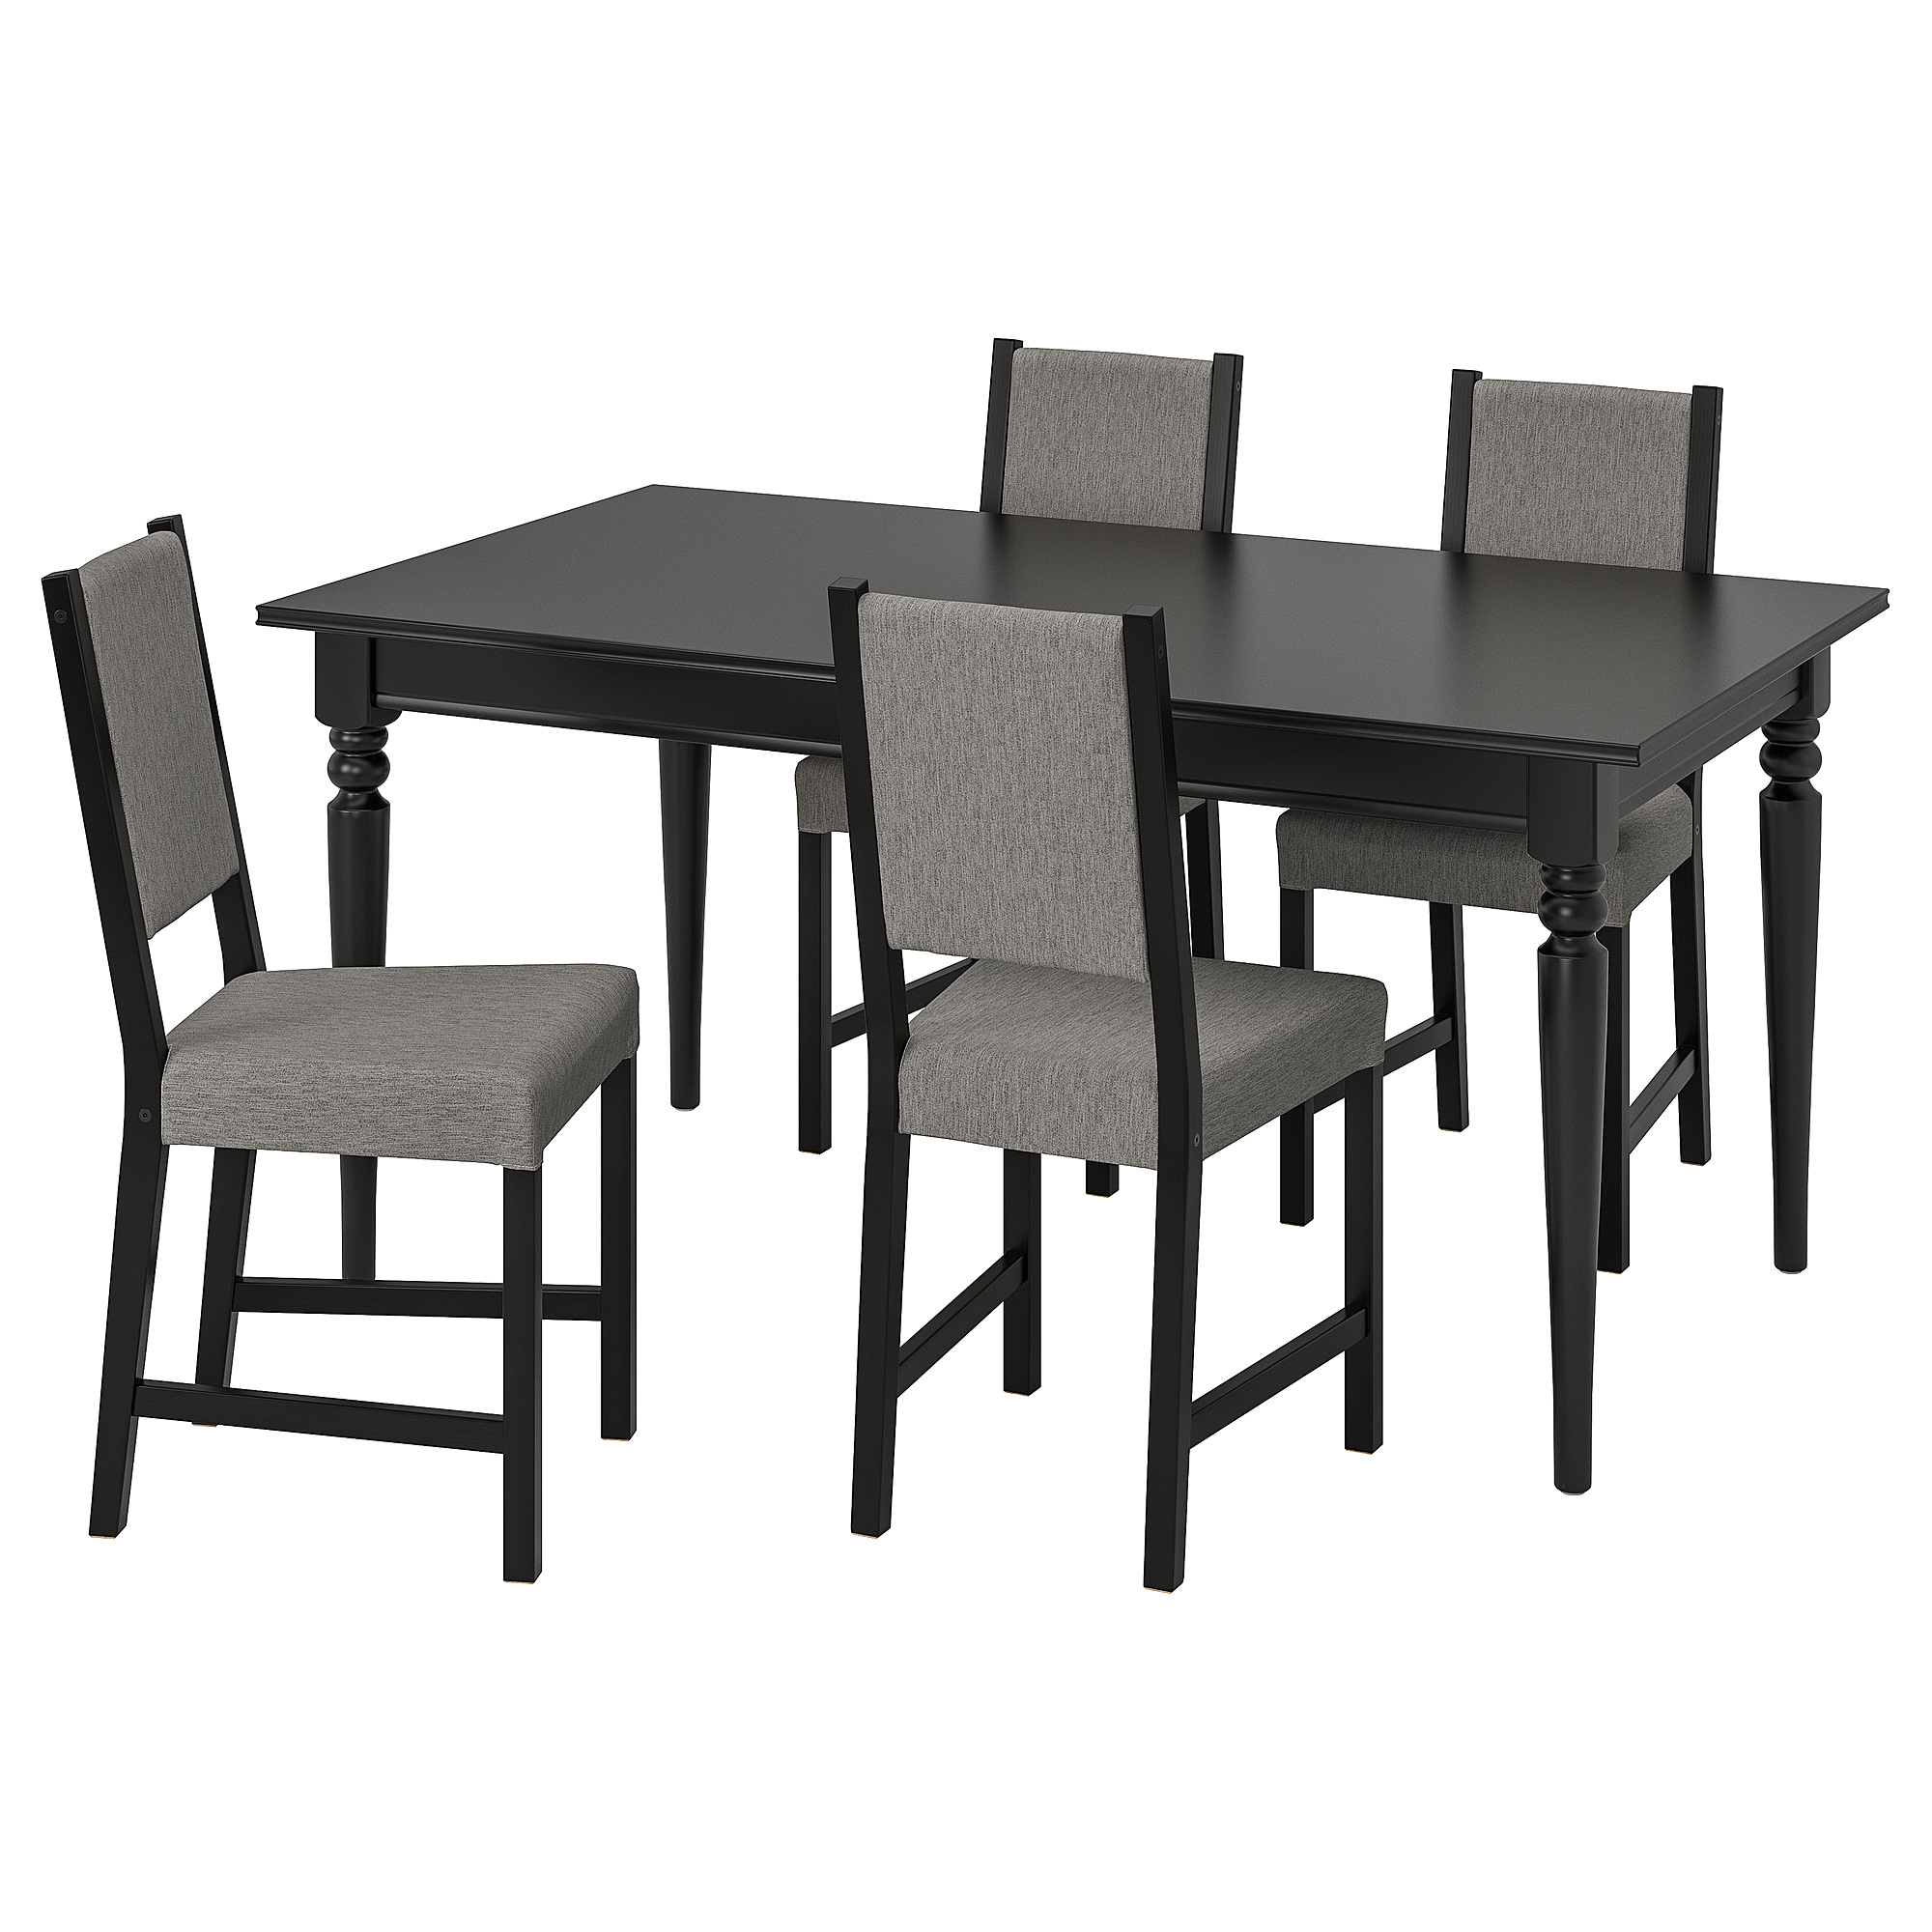 INGATORP/STEFAN table and 4 chairs